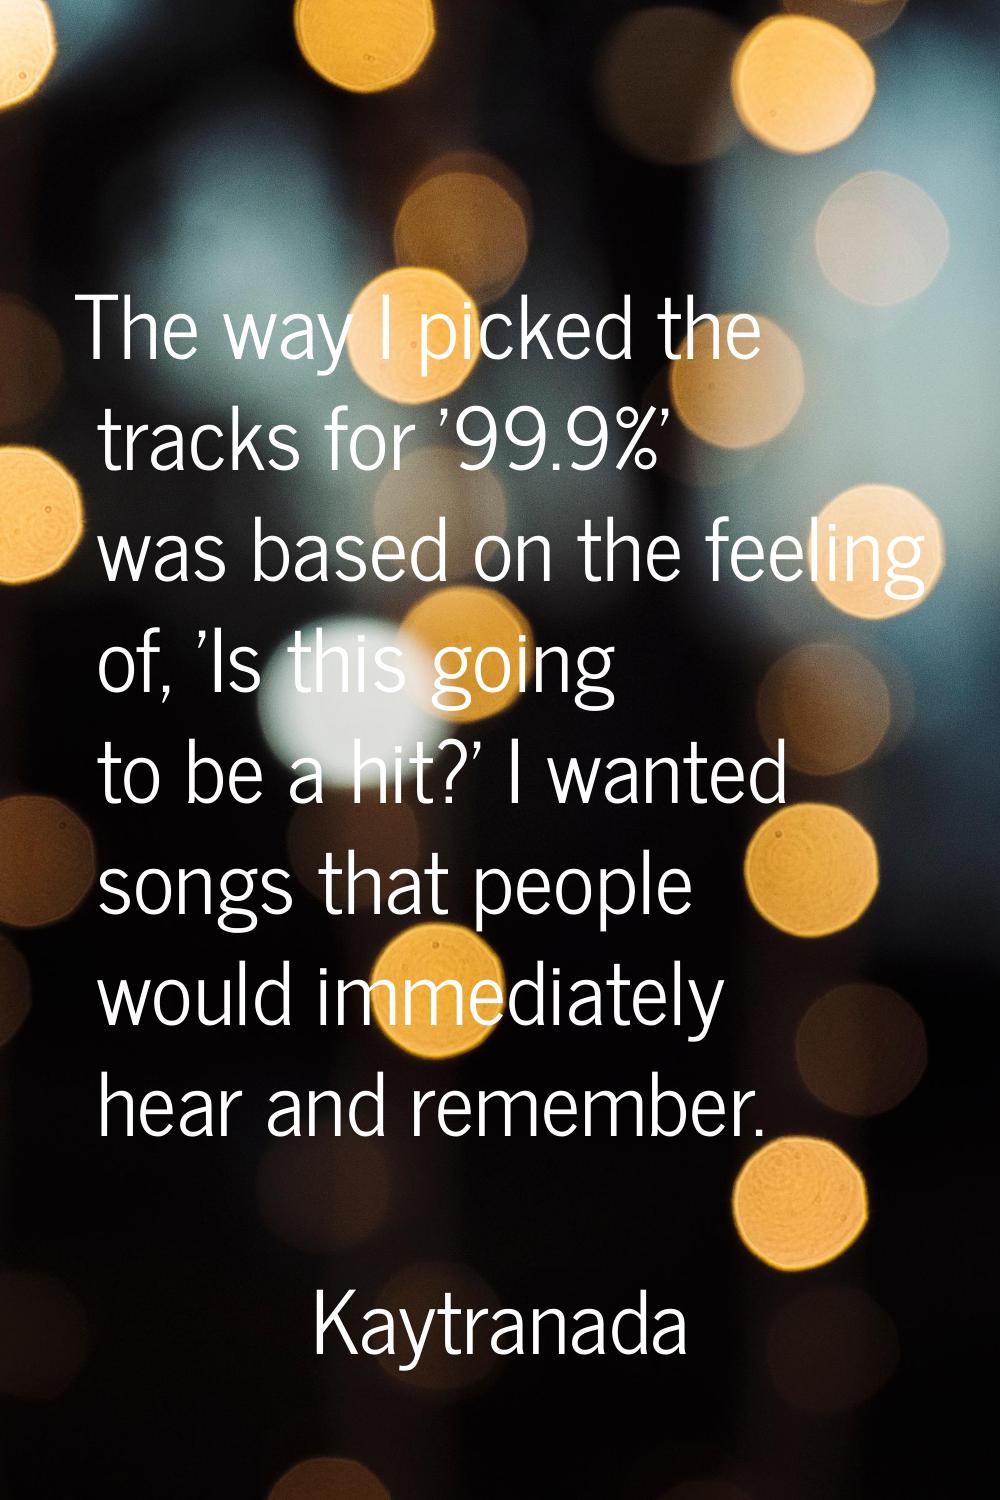 The way I picked the tracks for '99.9%' was based on the feeling of, 'Is this going to be a hit?' I